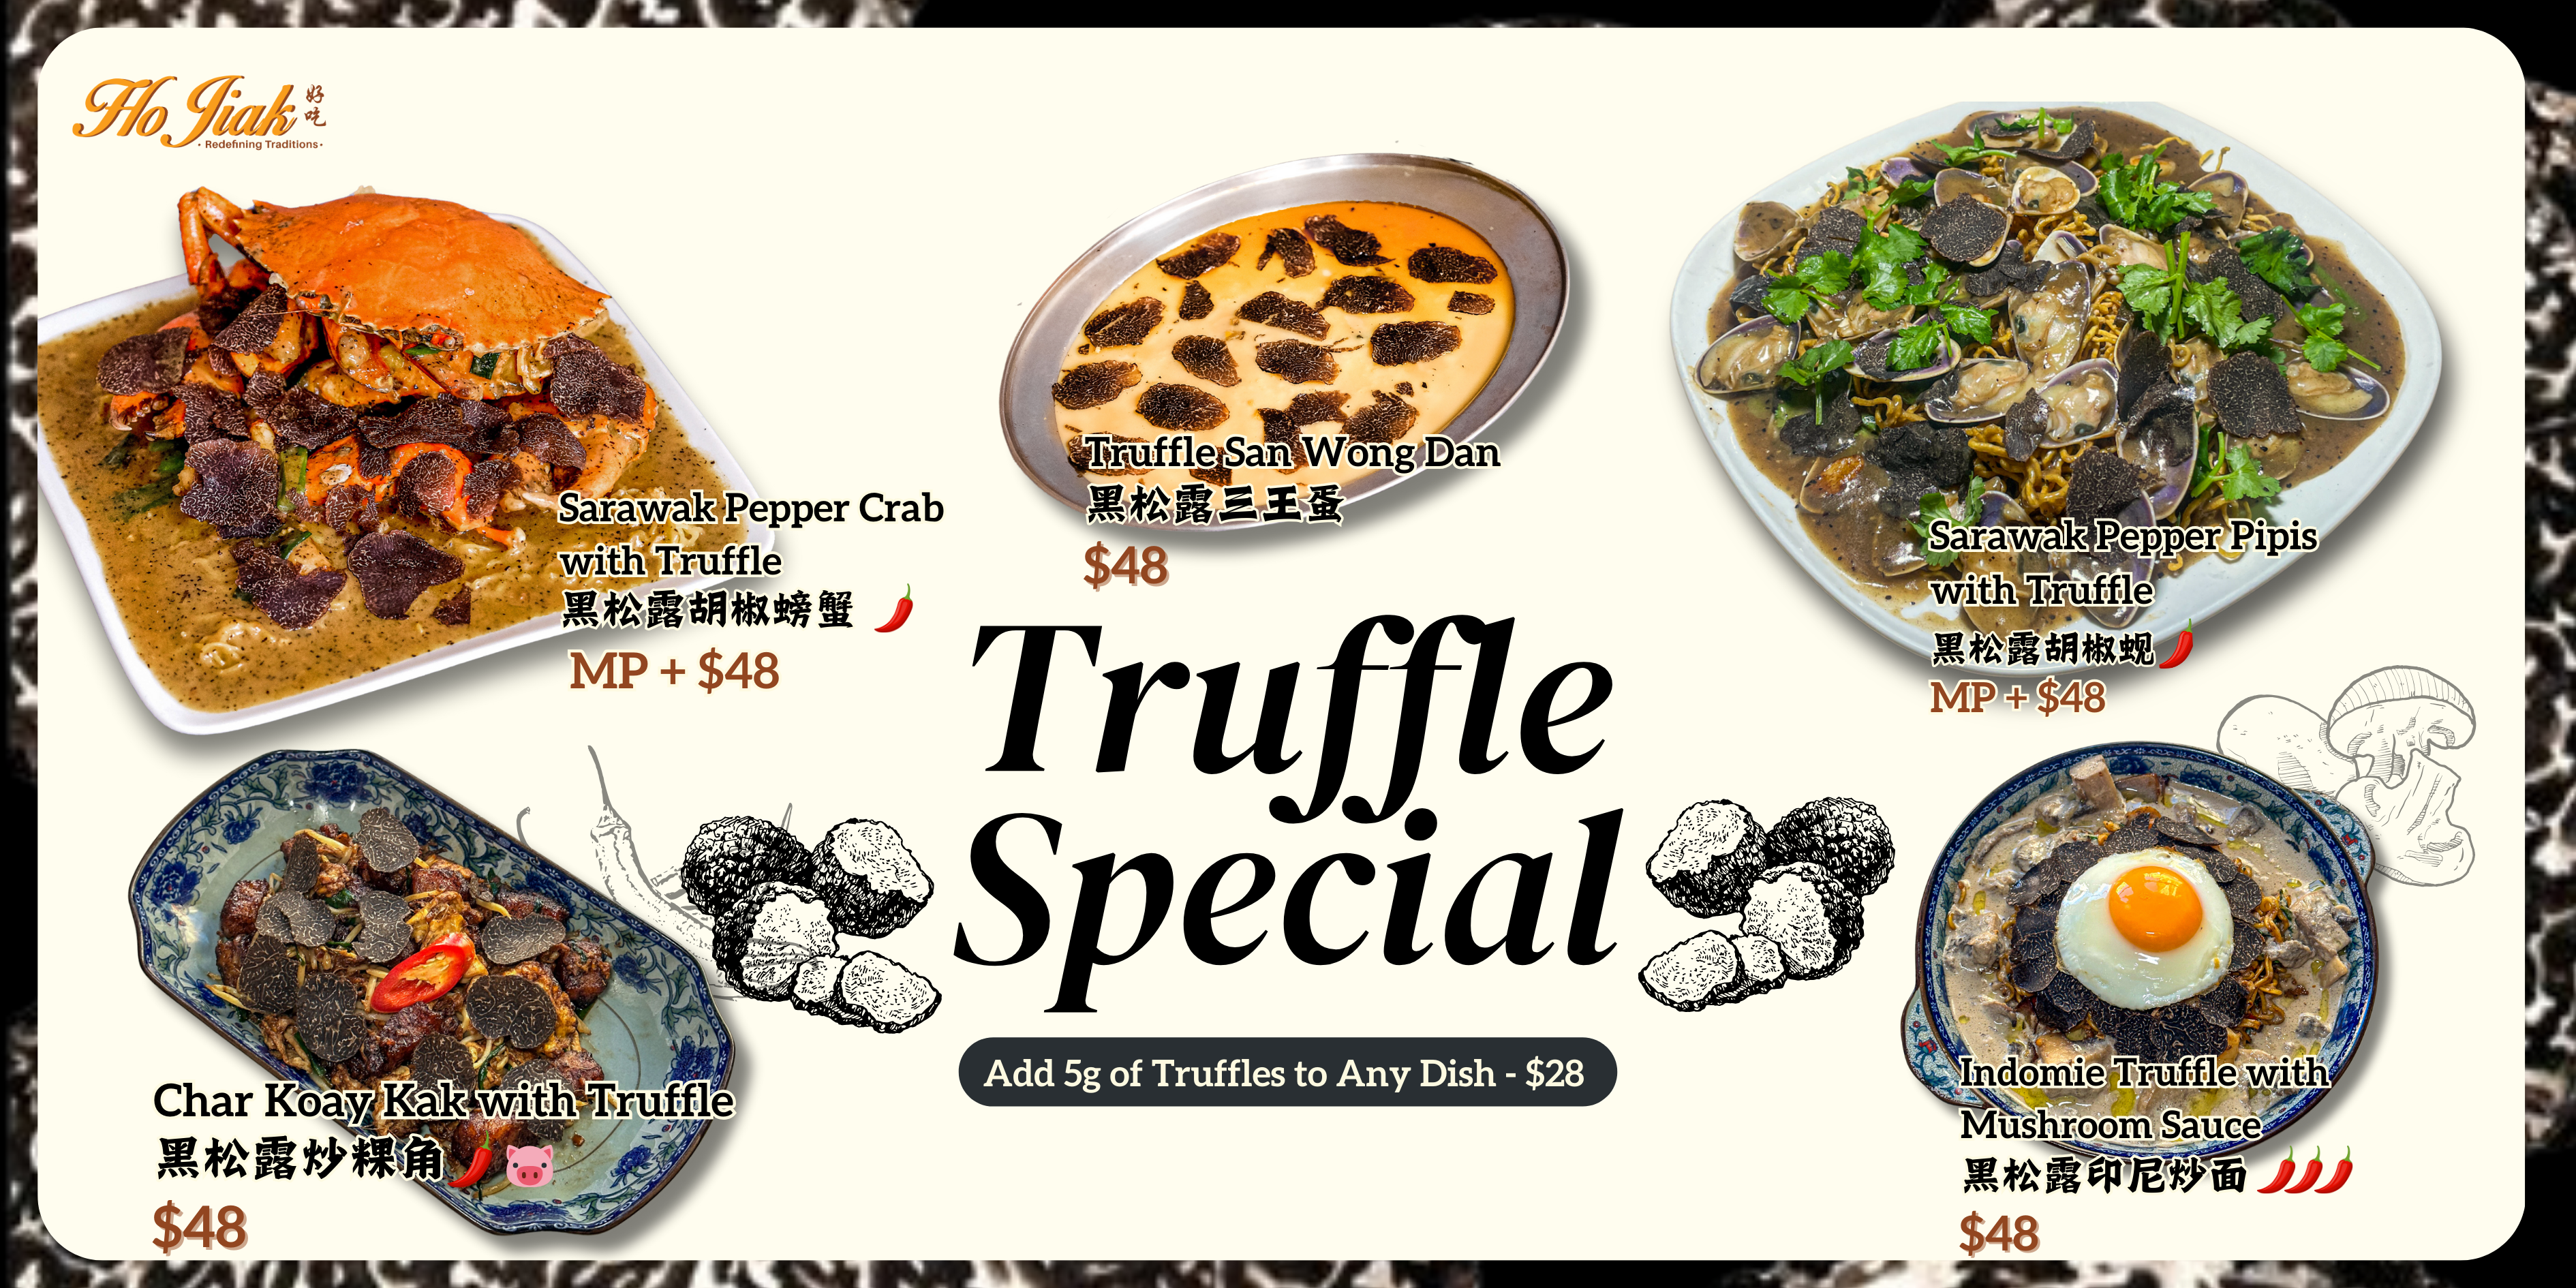 Get ready for a Truffle Sensation! Explore our specially curated menu highlighting the essence of truffles, launching June 21st